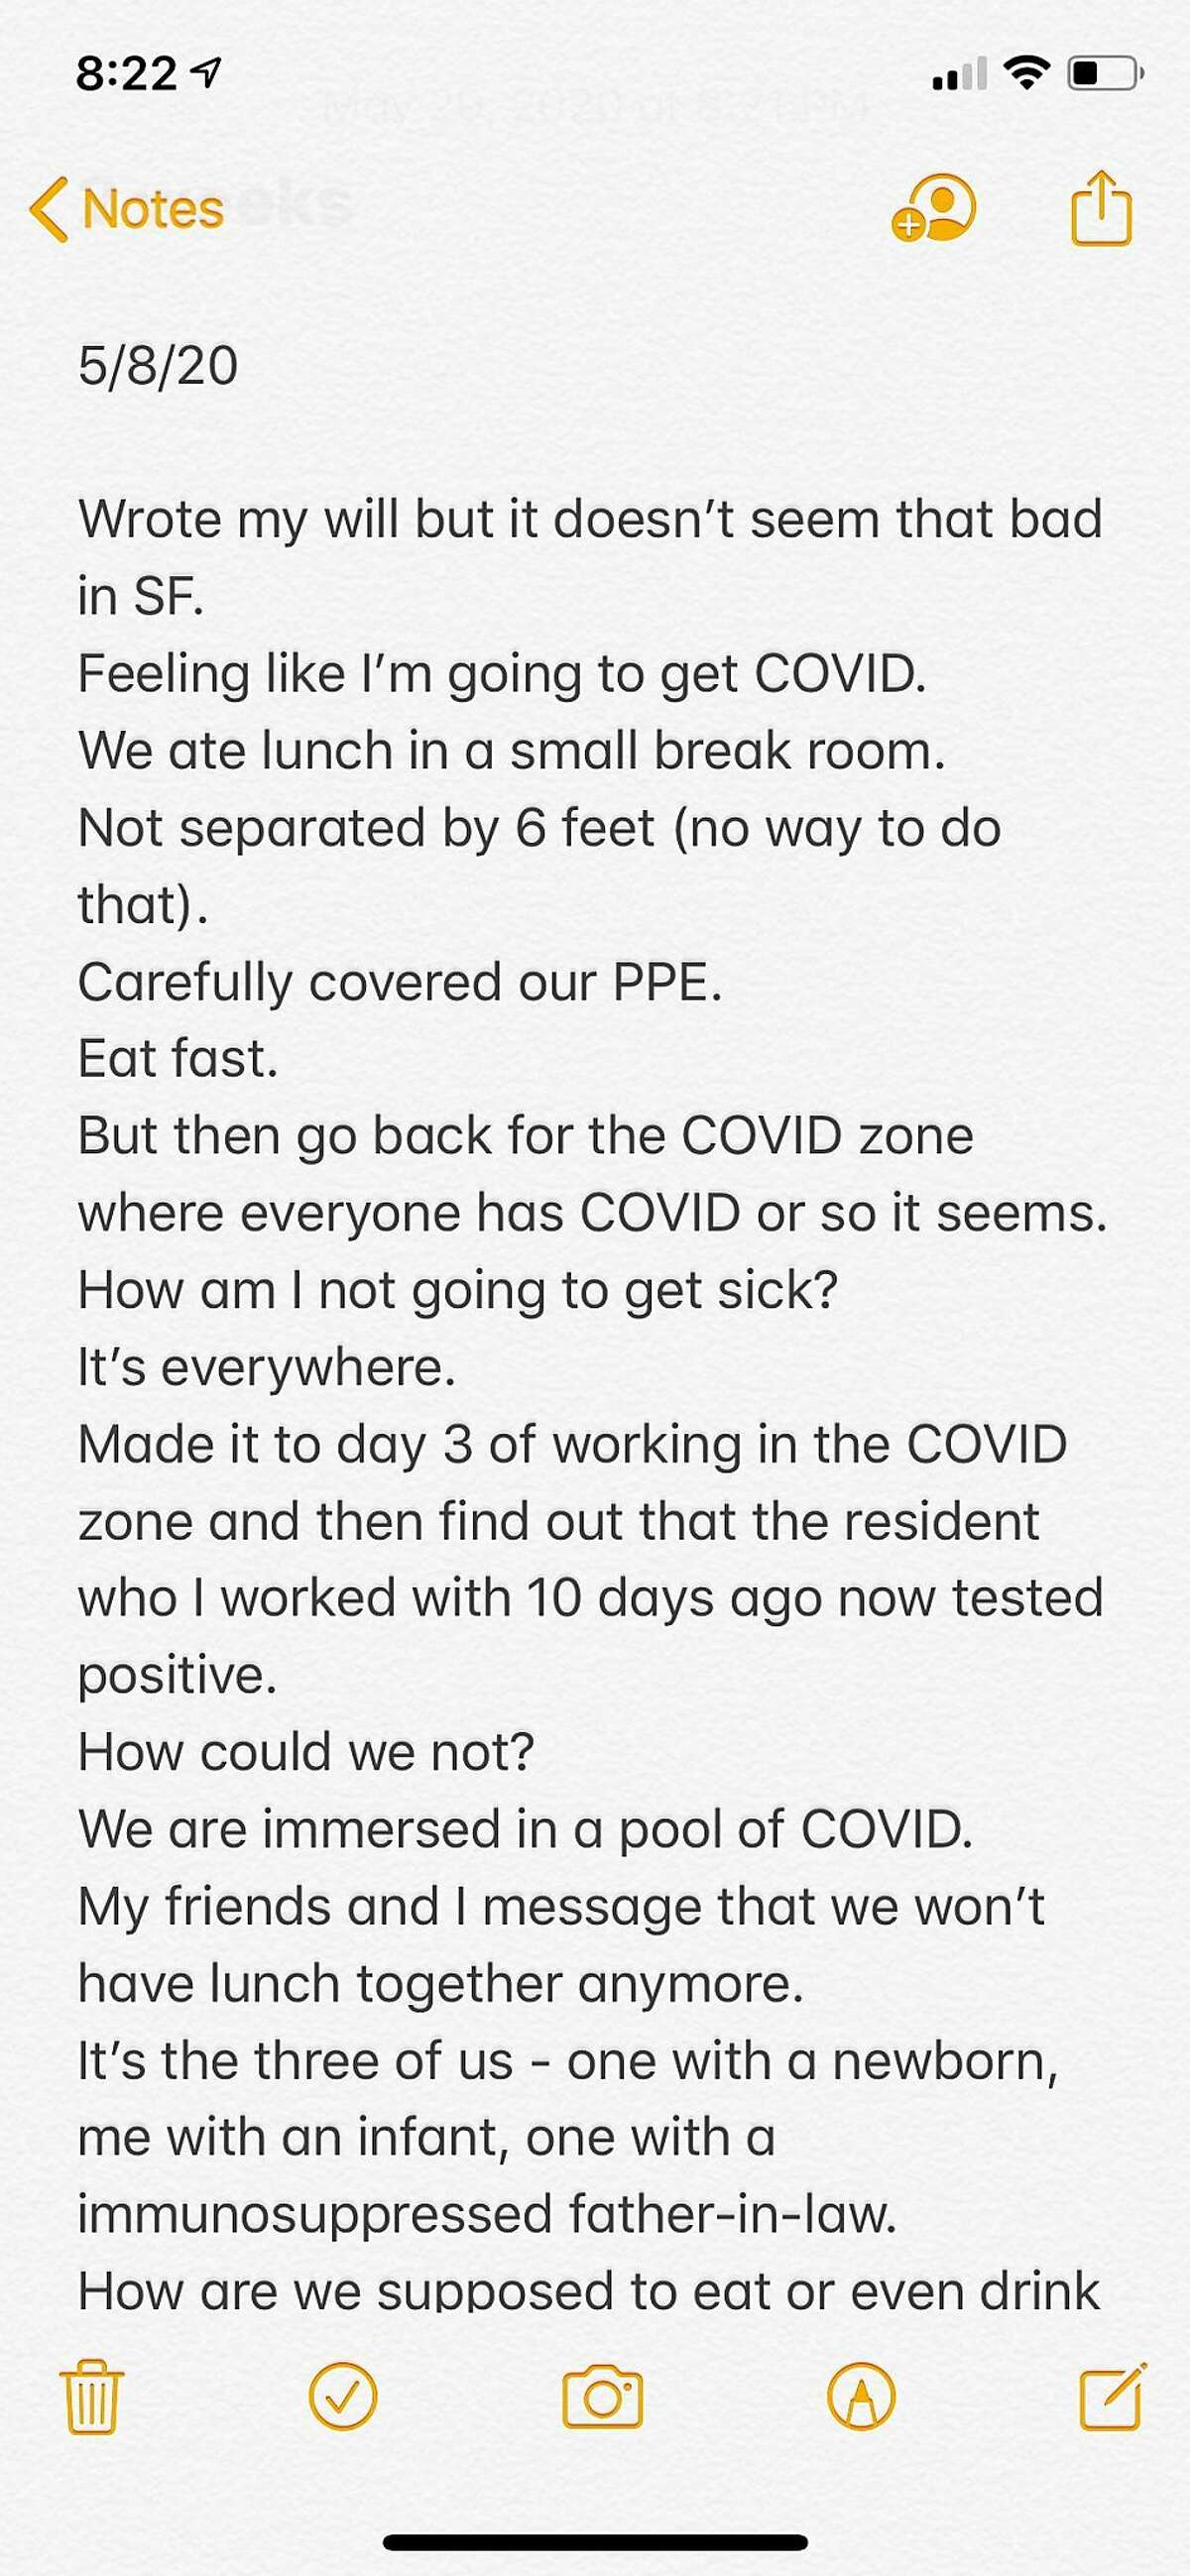 Screenshots from diary-like entries Dr. Debbie Yi Madhok made on her iPhone as an ER doctor treating COVID-19 patients at Zuckerberg San Francisco General Hospital and Trauma Center in the Spring of 2020.